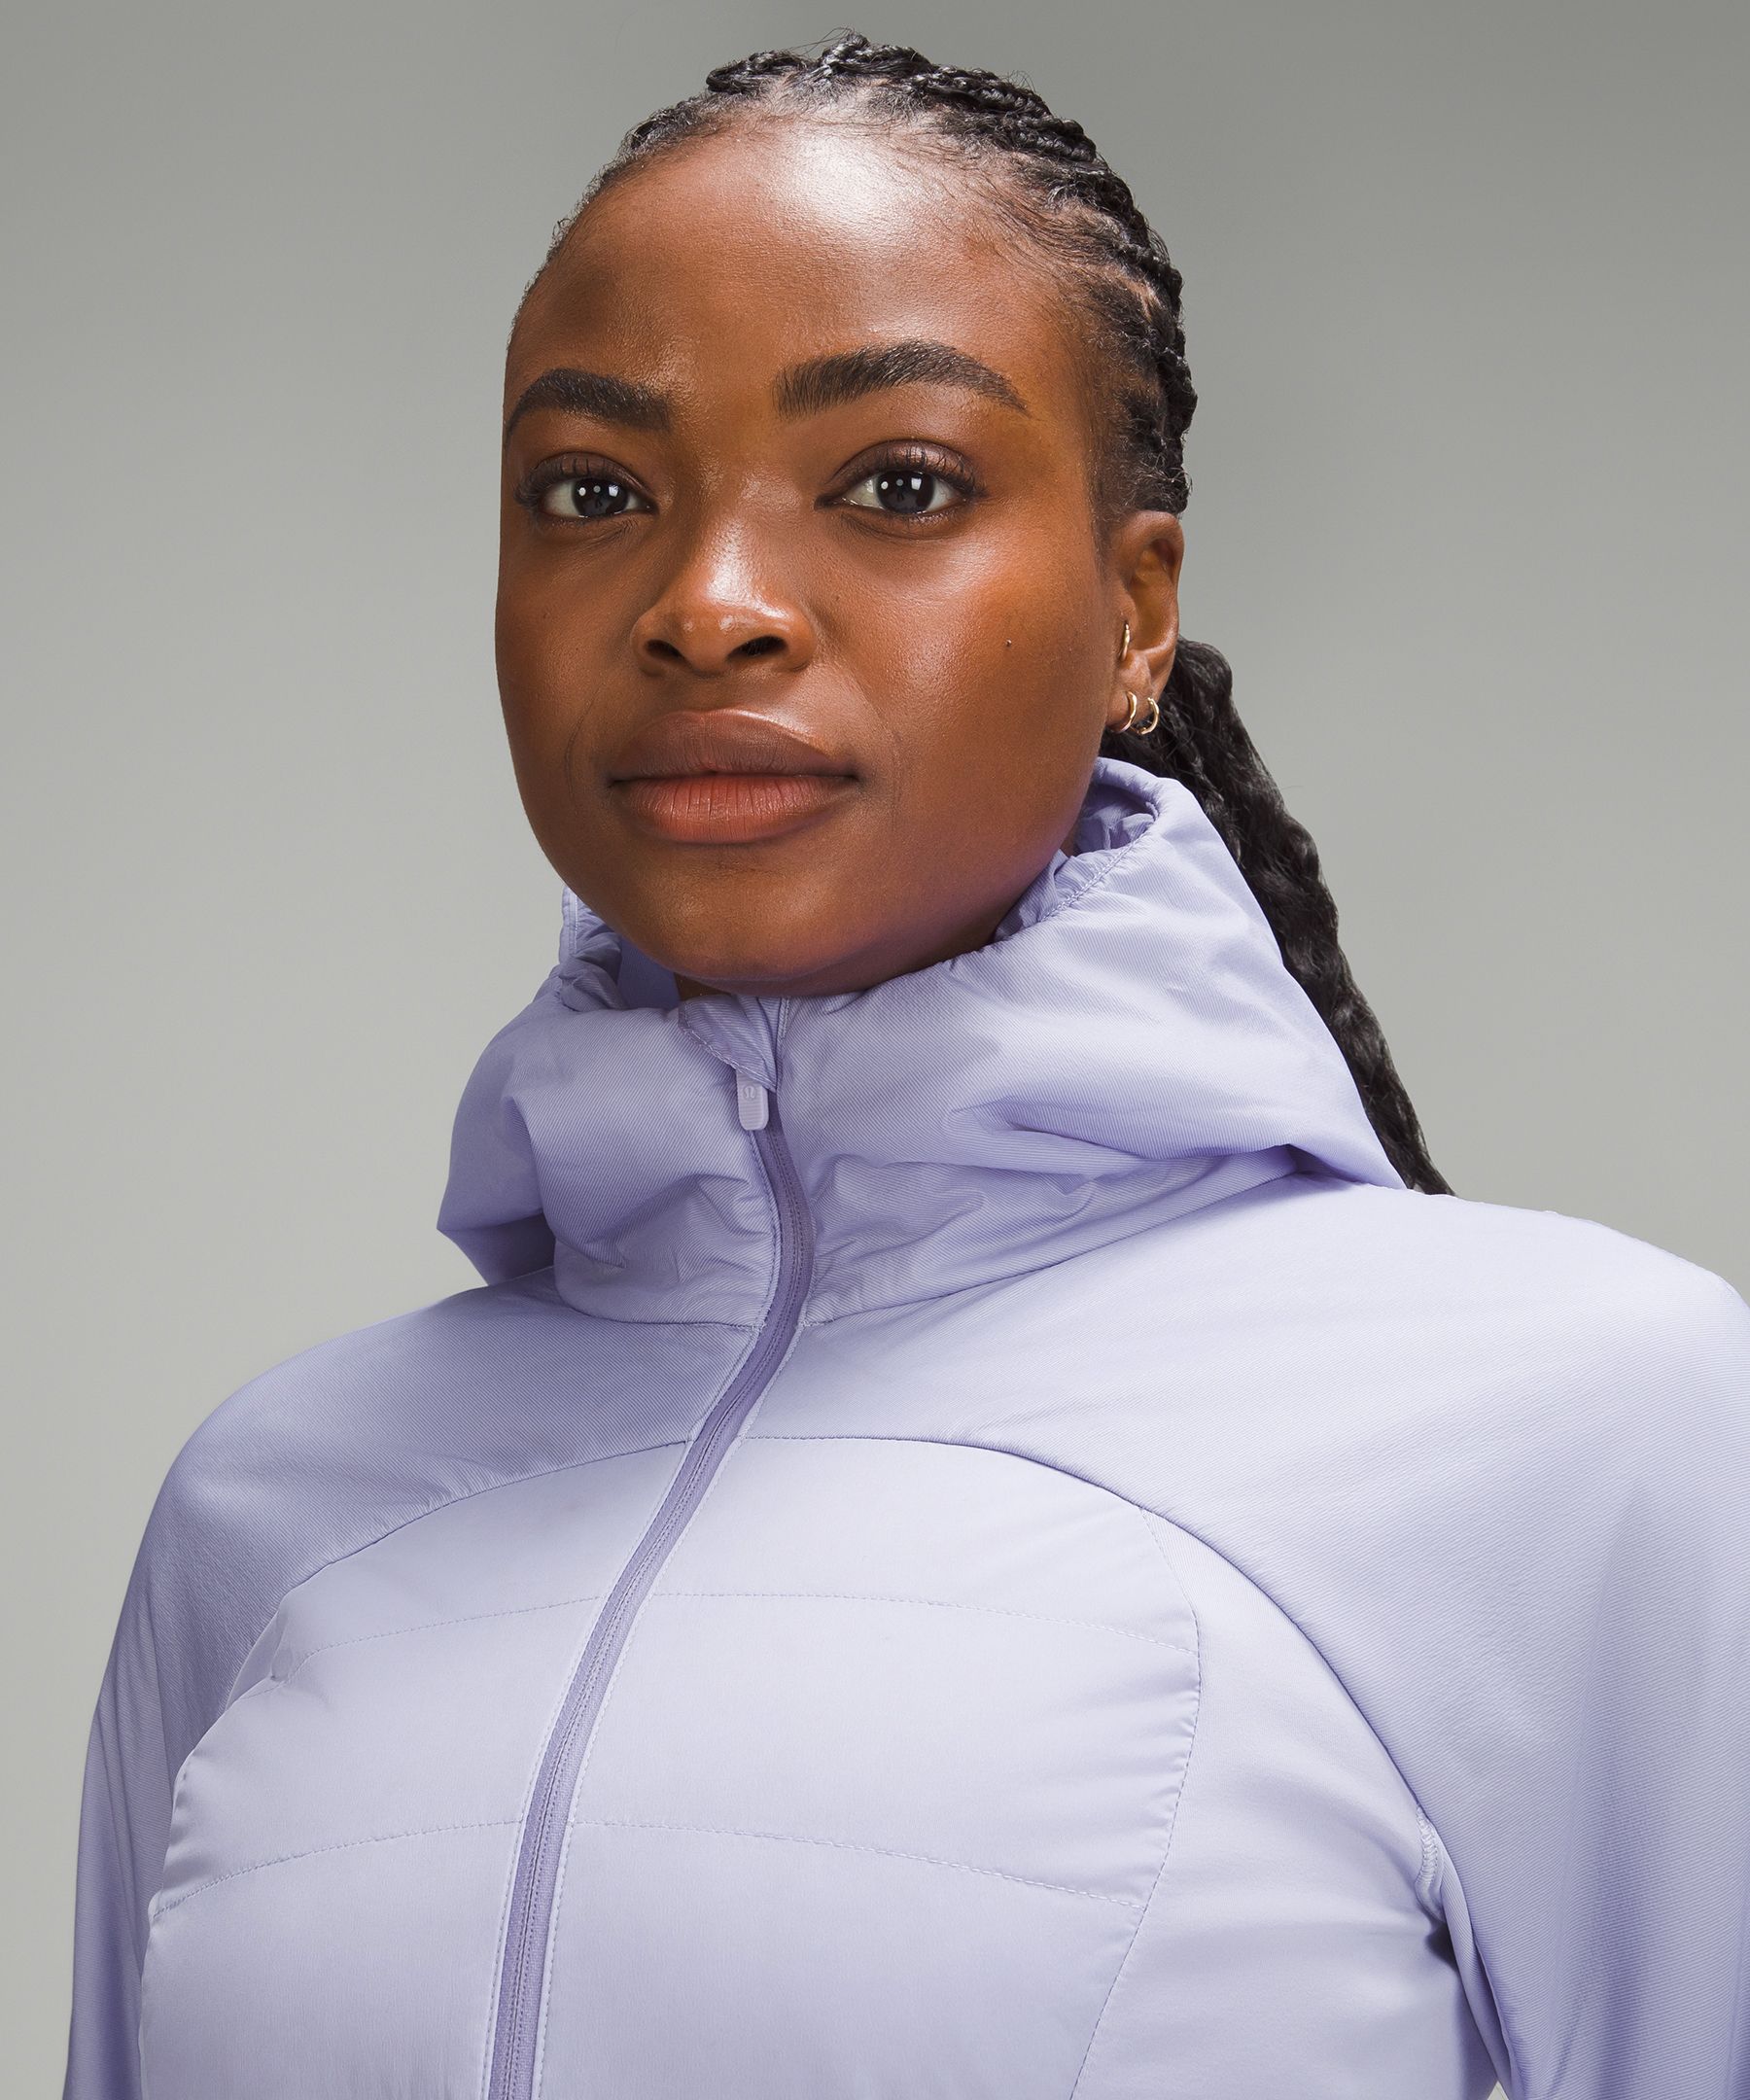 lululemon Down for It All Jacket Review - Schimiggy Reviews